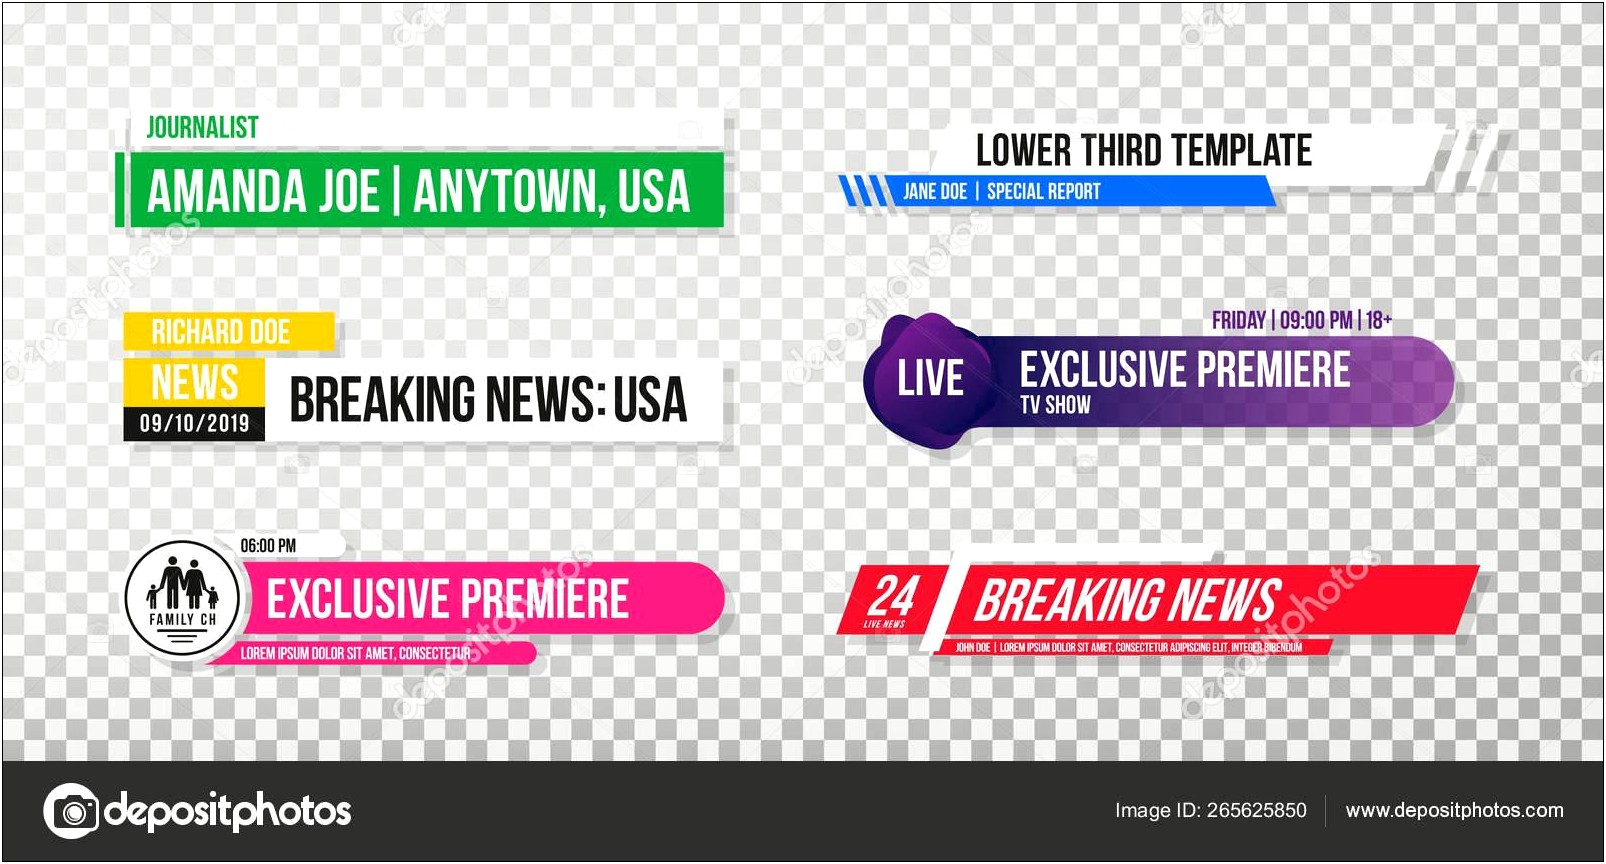 Free News Lower Third Template Premiere Pro Templates : Resume